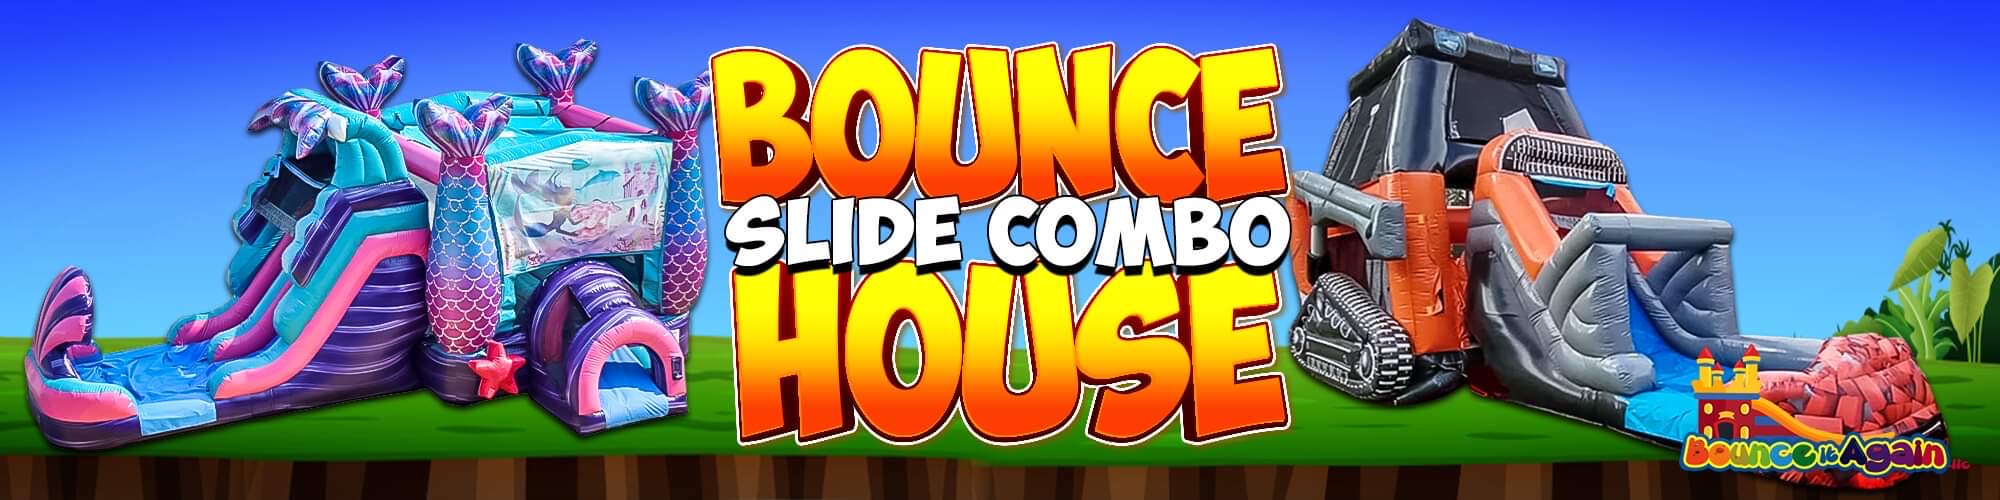 Bounce House Rentals In Lakeland Highlands, FL - Bounce It Again